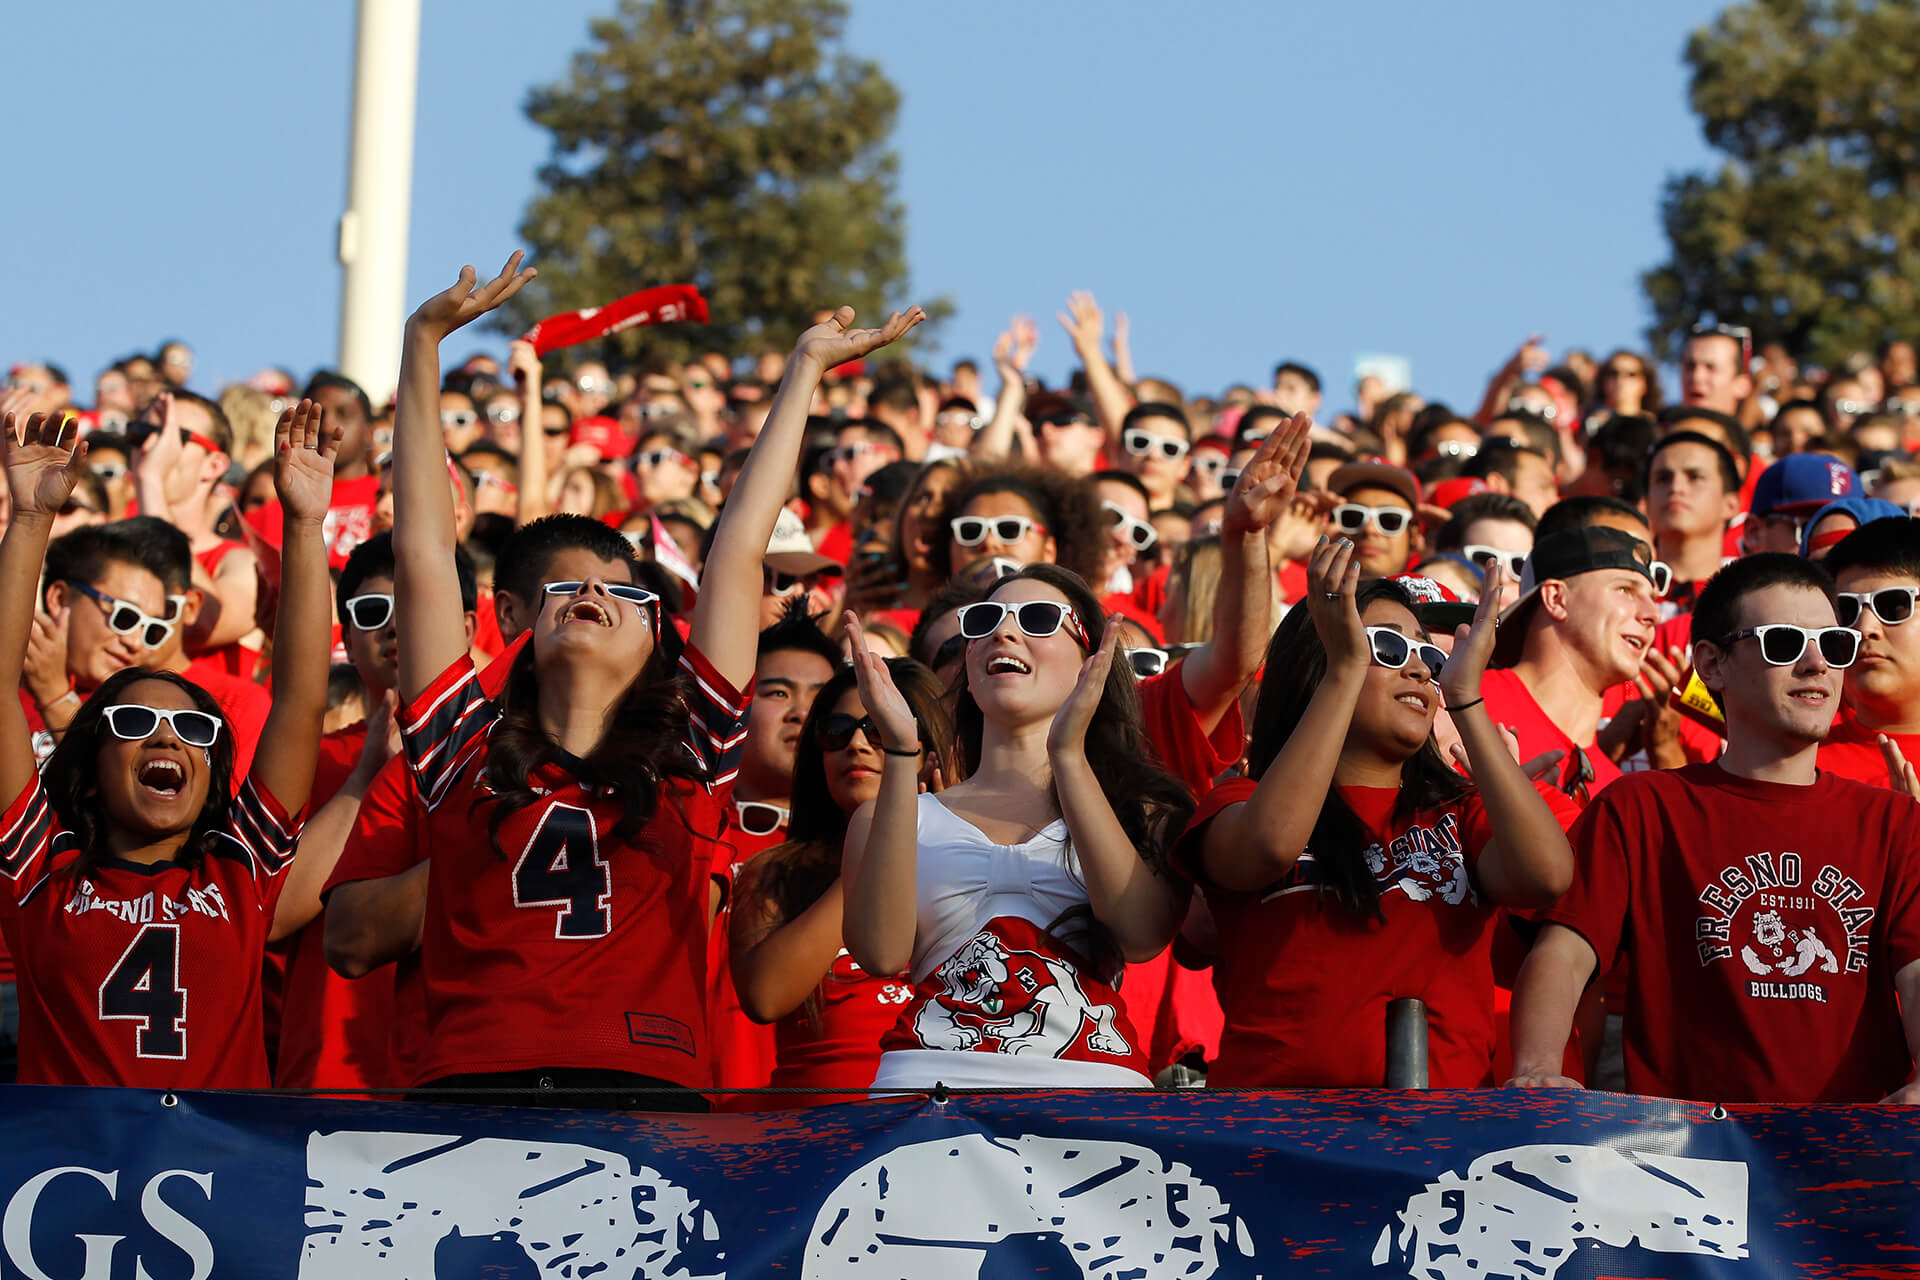 Fresno State students cheering at a football game